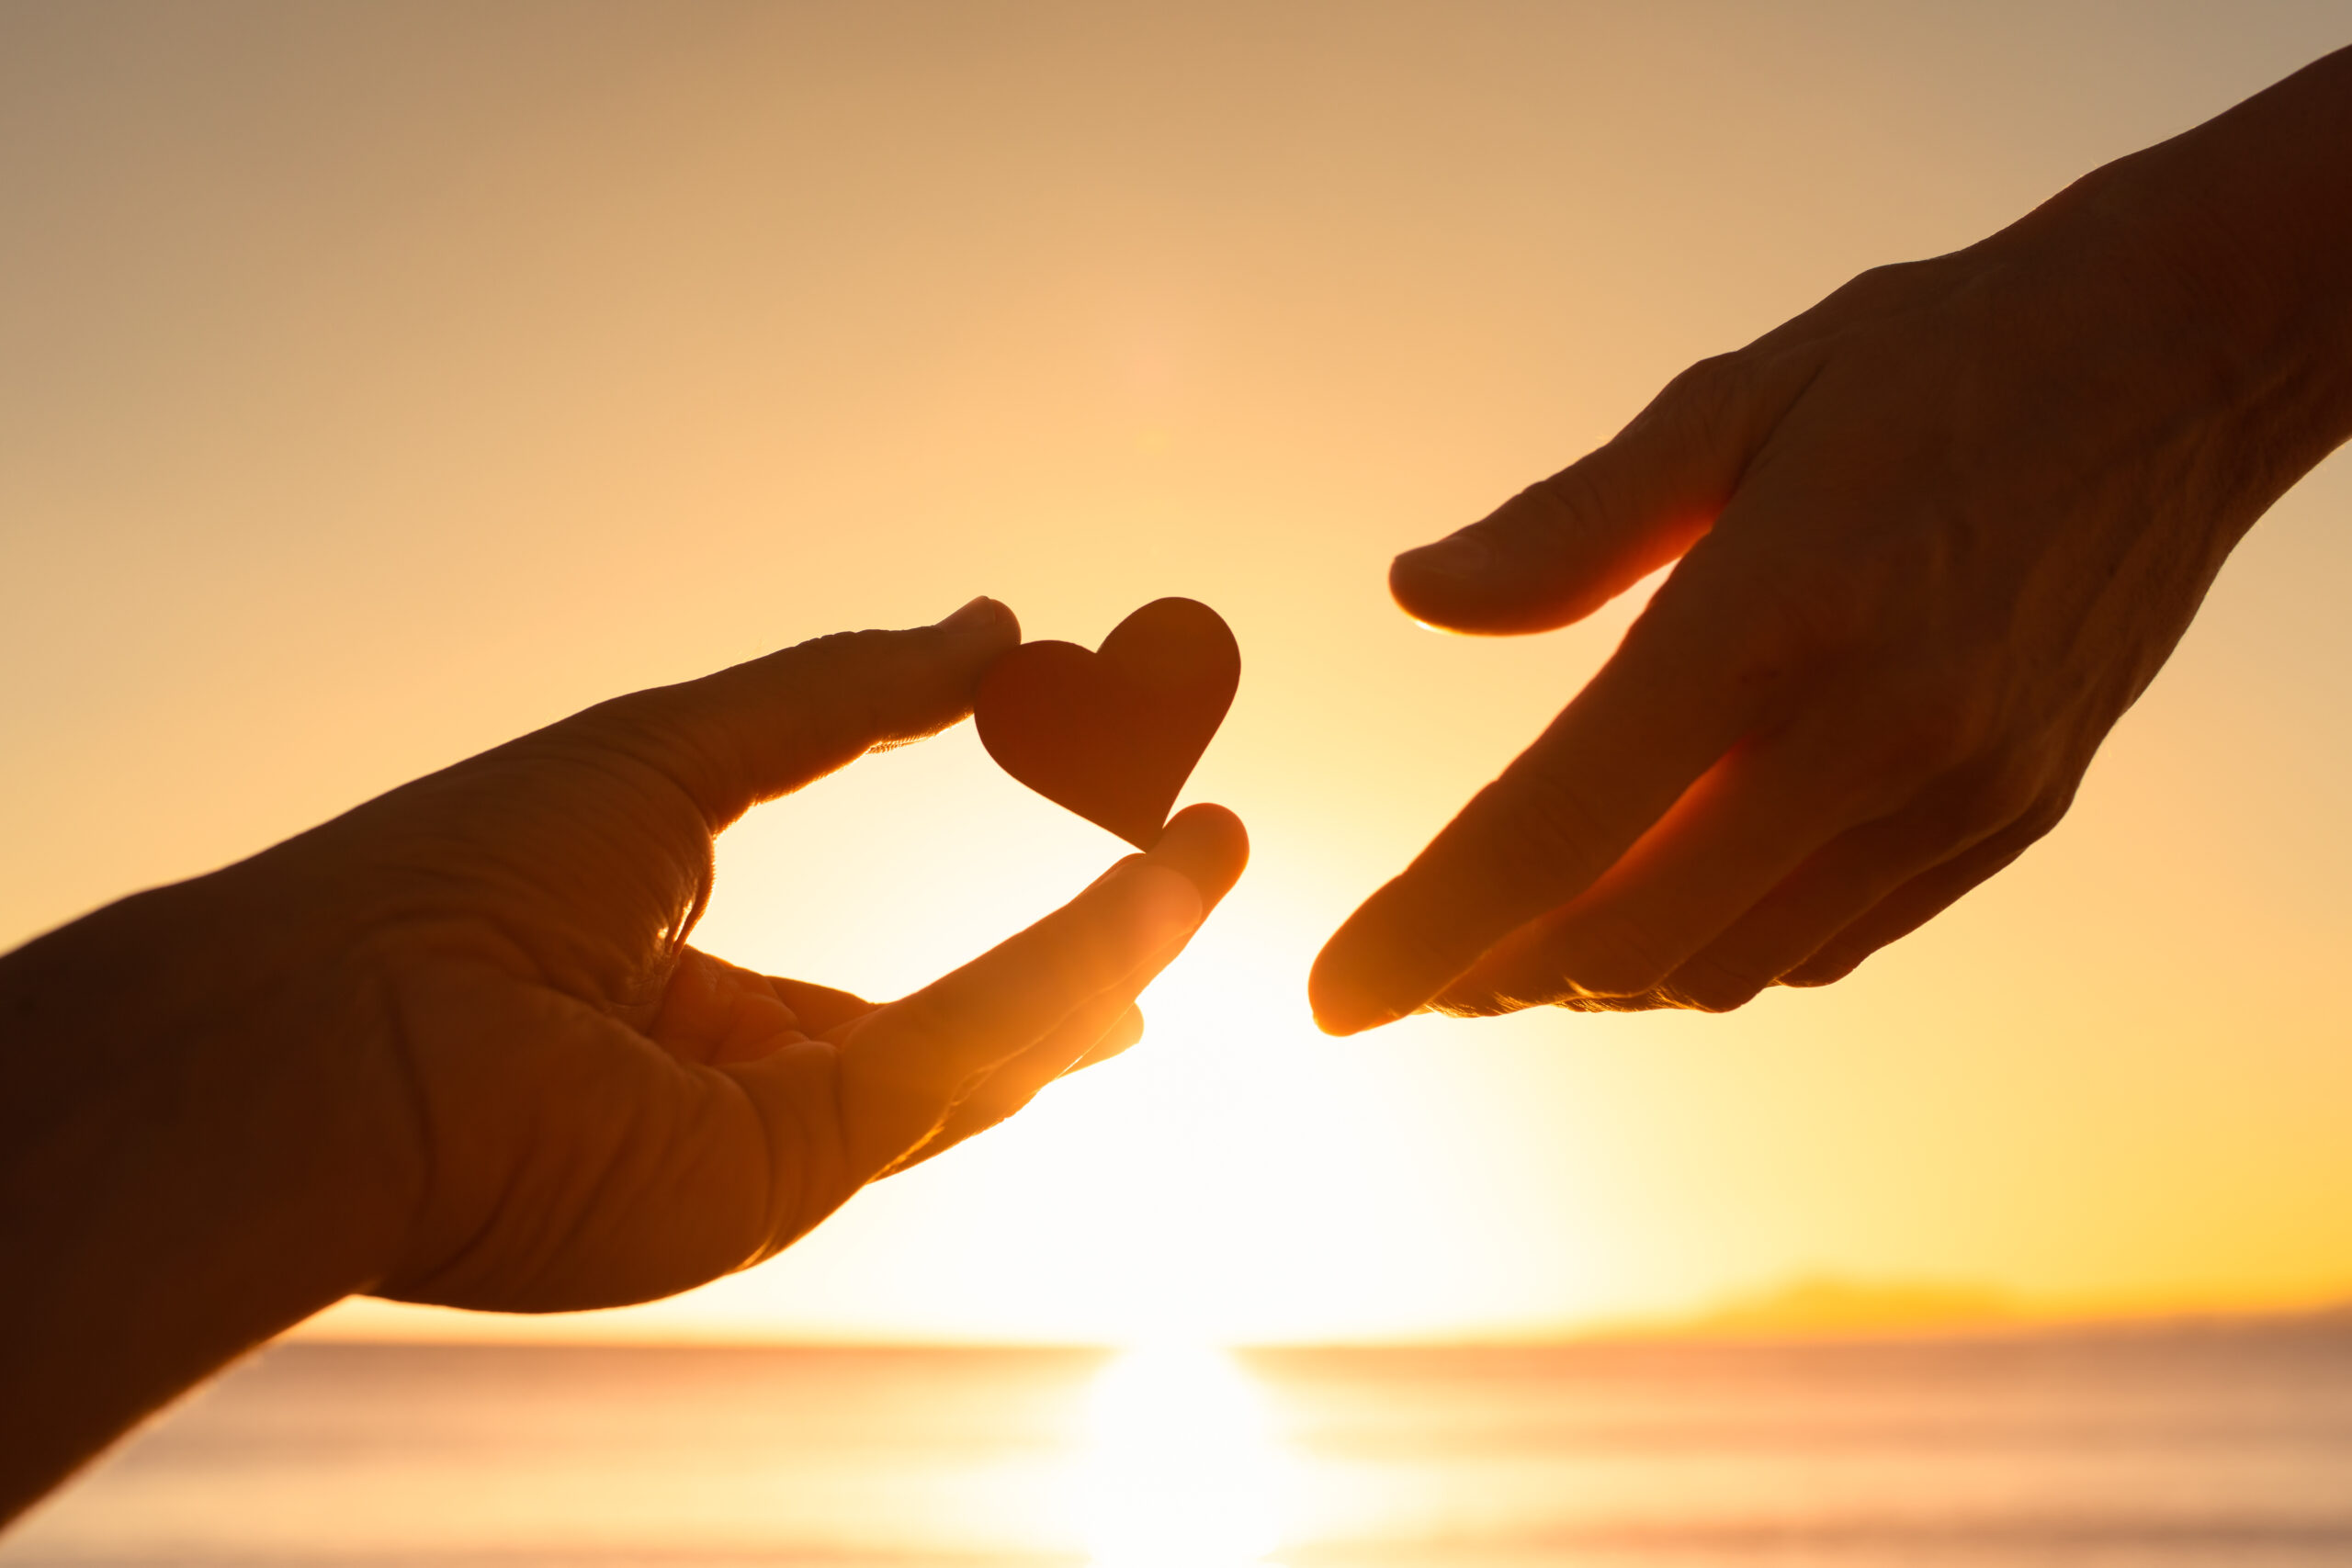 silhouette of one hand passing a heart-shaped token to another hand against the background of a sunrise